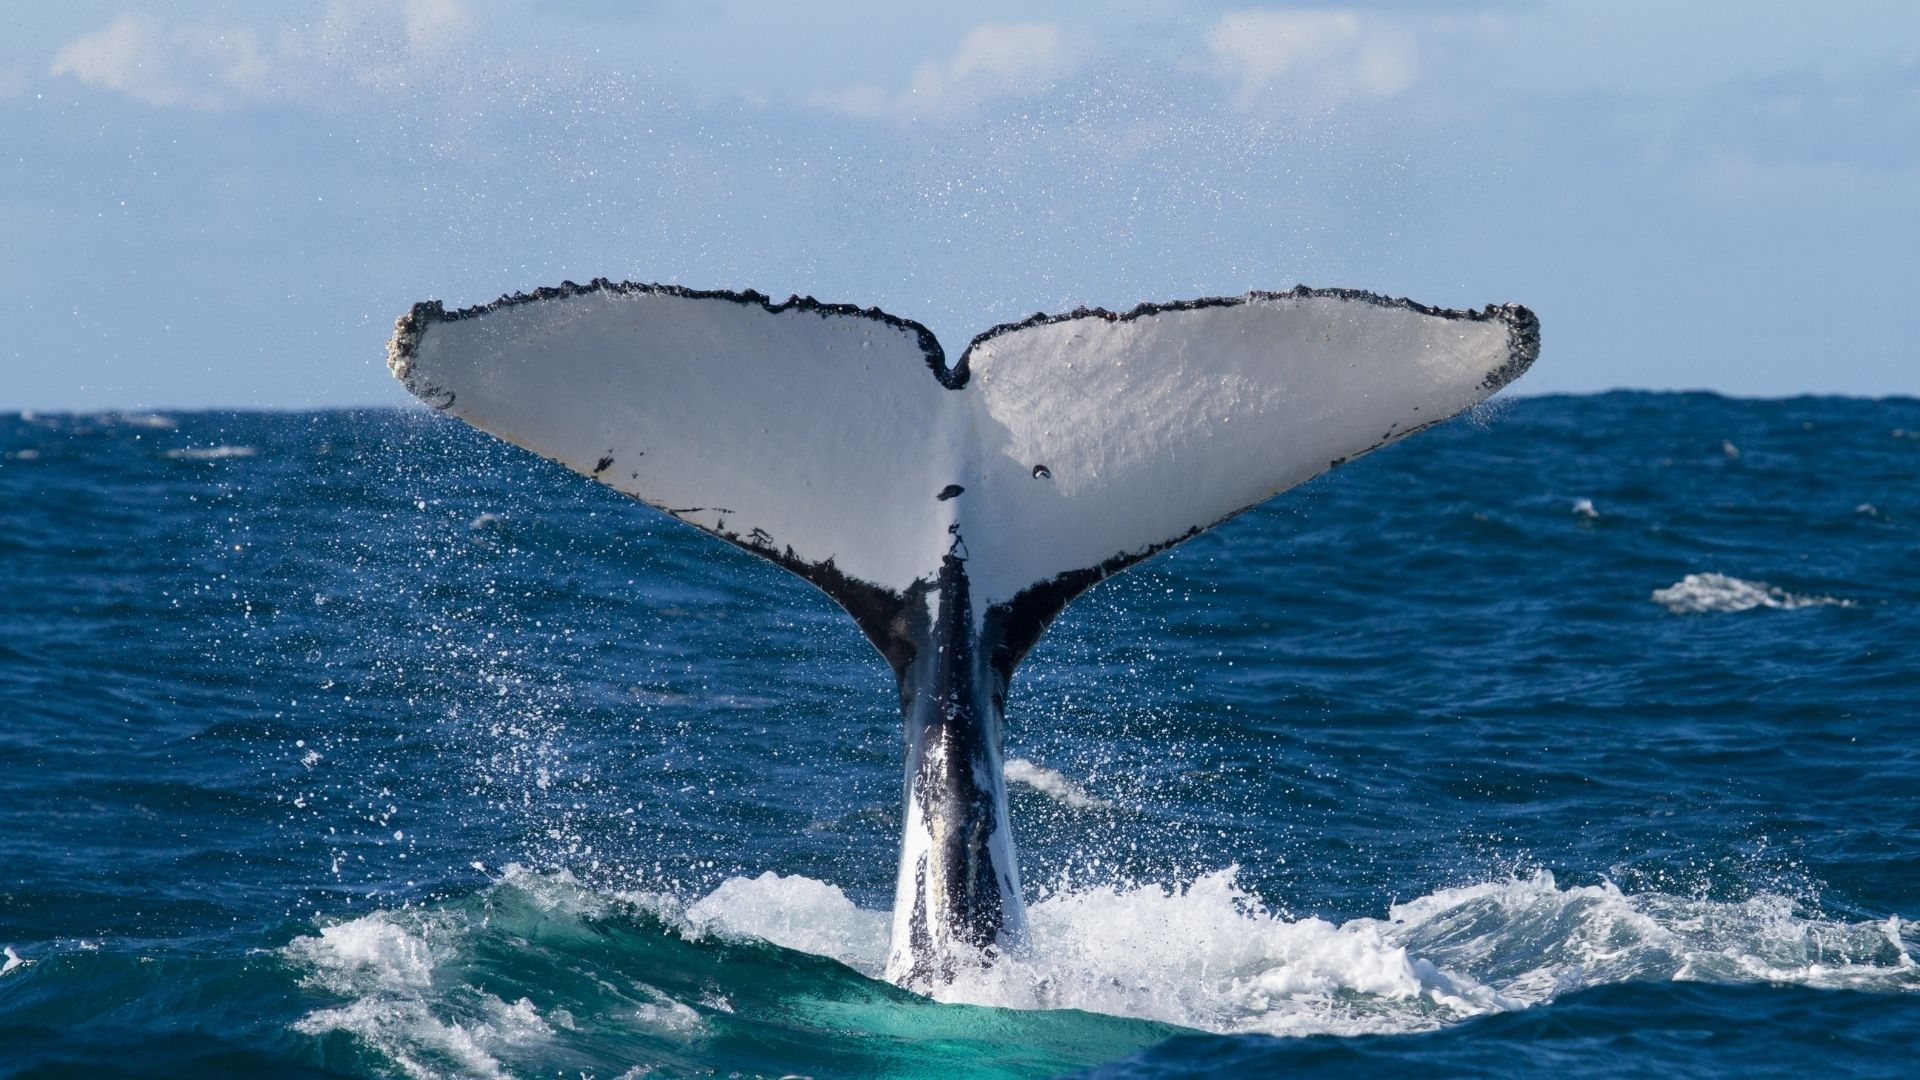 Costa Rica, whale watching tours promise an unforgettable trip!